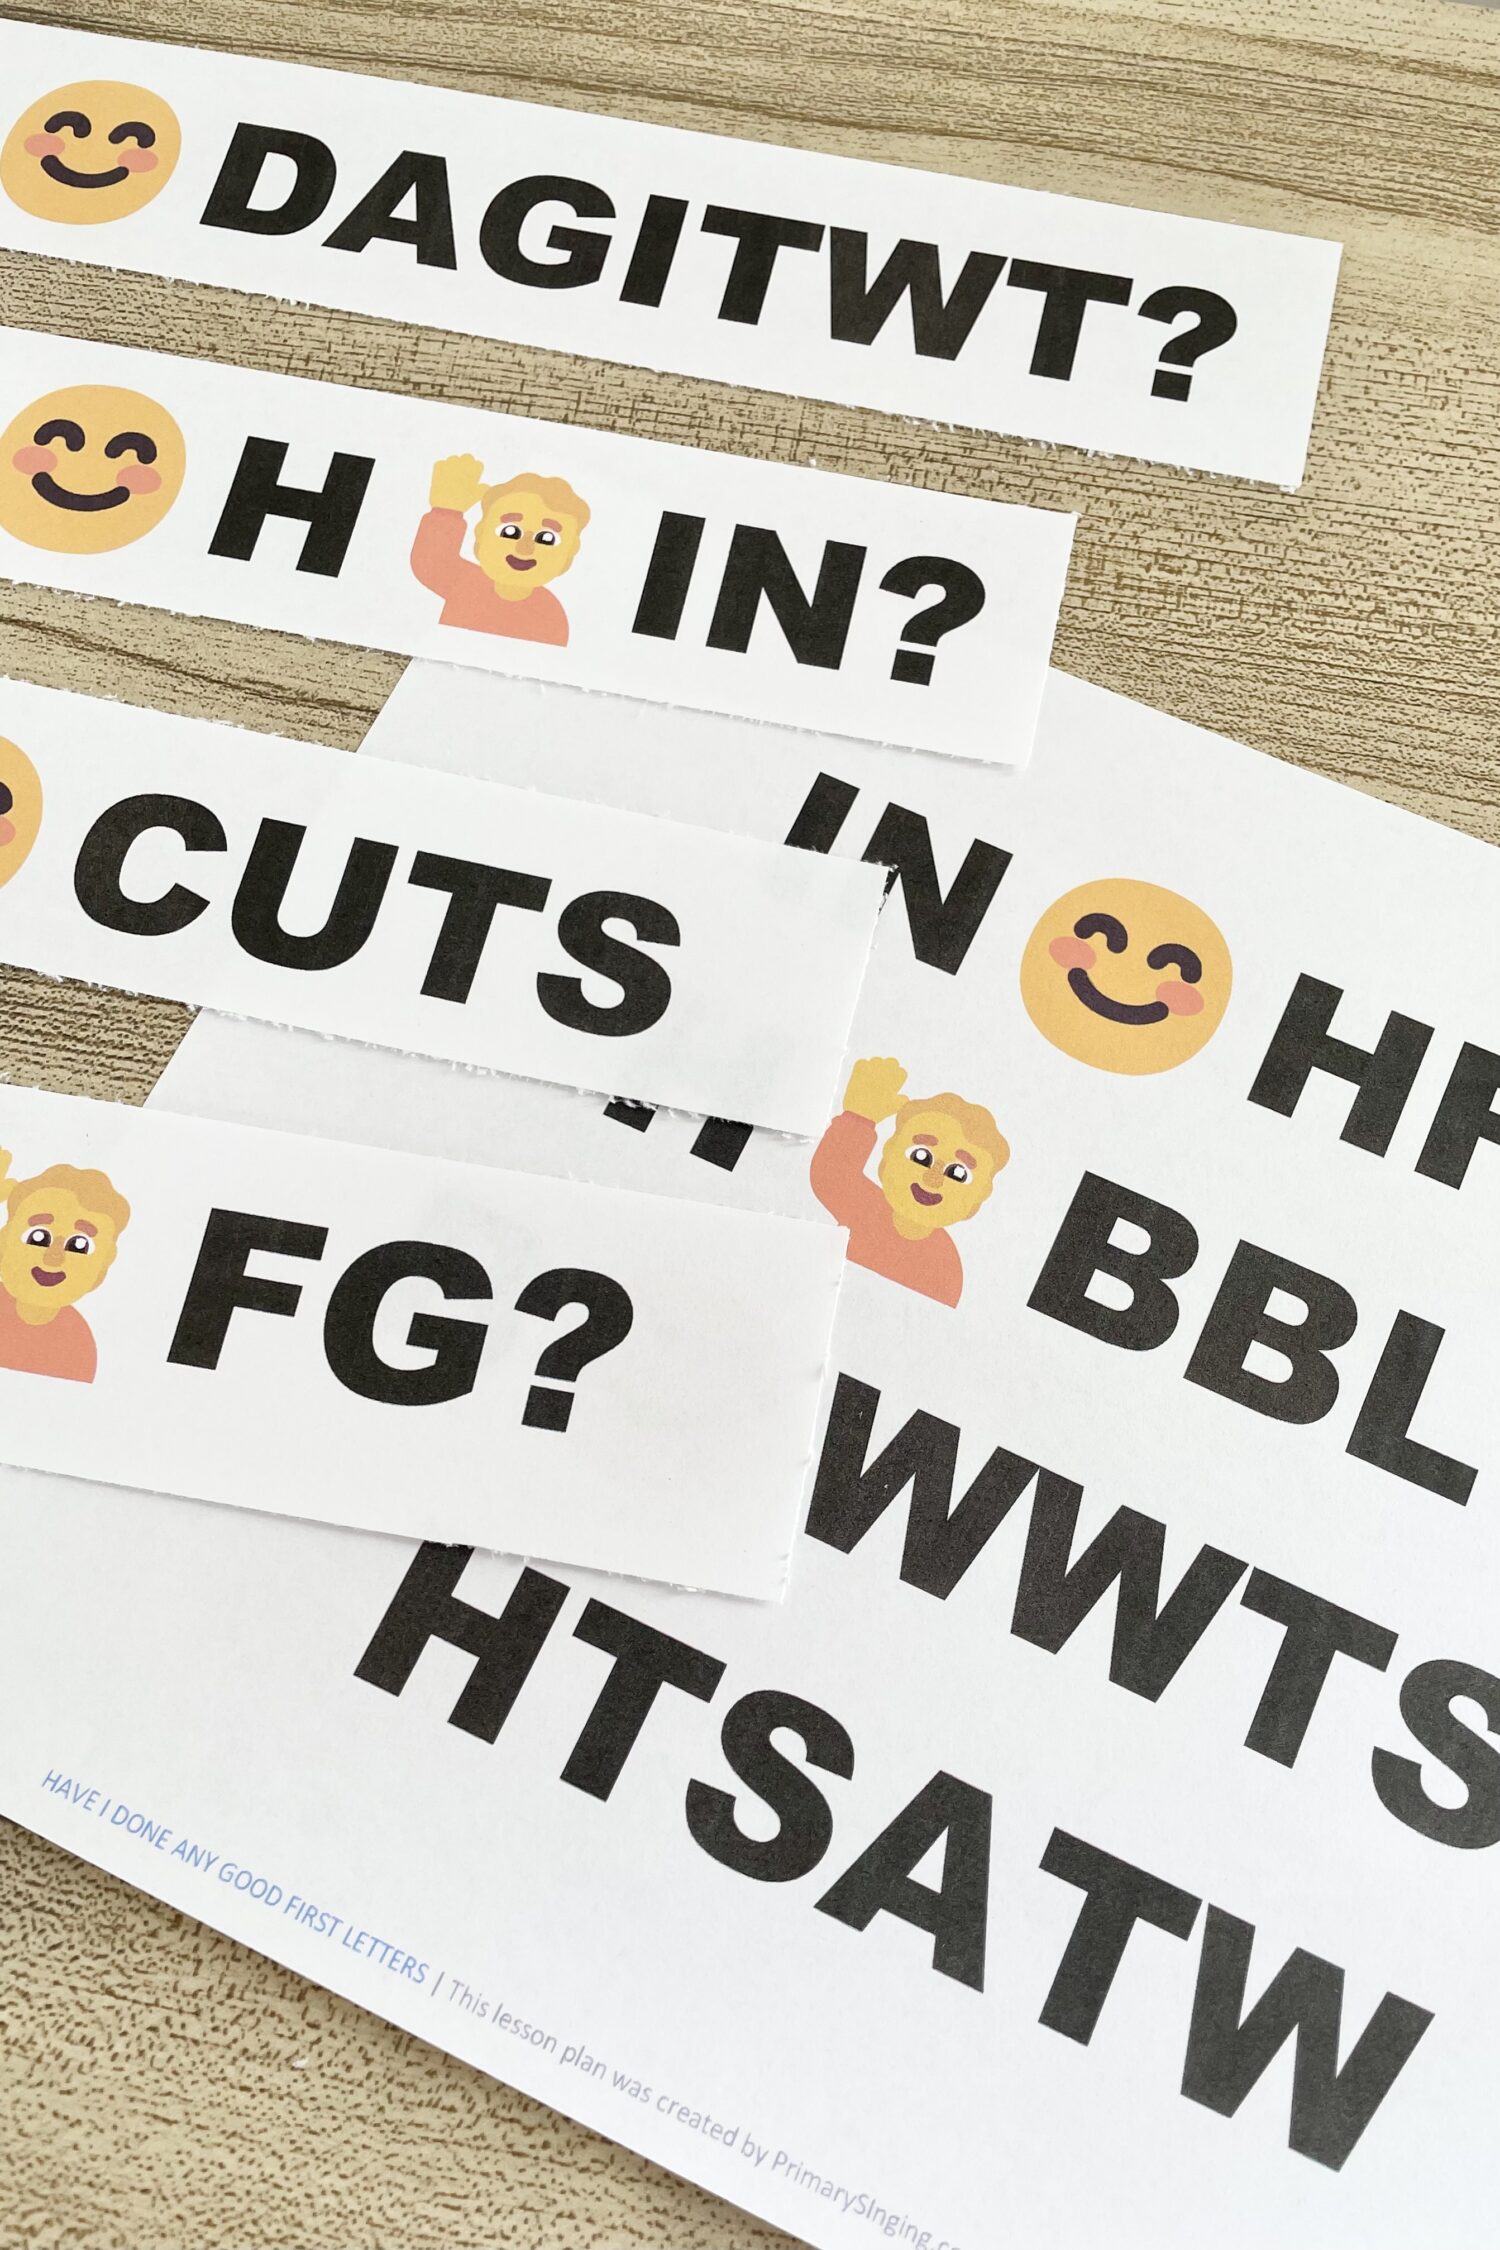 Have I Done Any Good First Letters - use this fun logical conclusion singing time idea with only the first letter of each word! Grab this puzzle with printable song helps for LDS Primary Music Leaders.